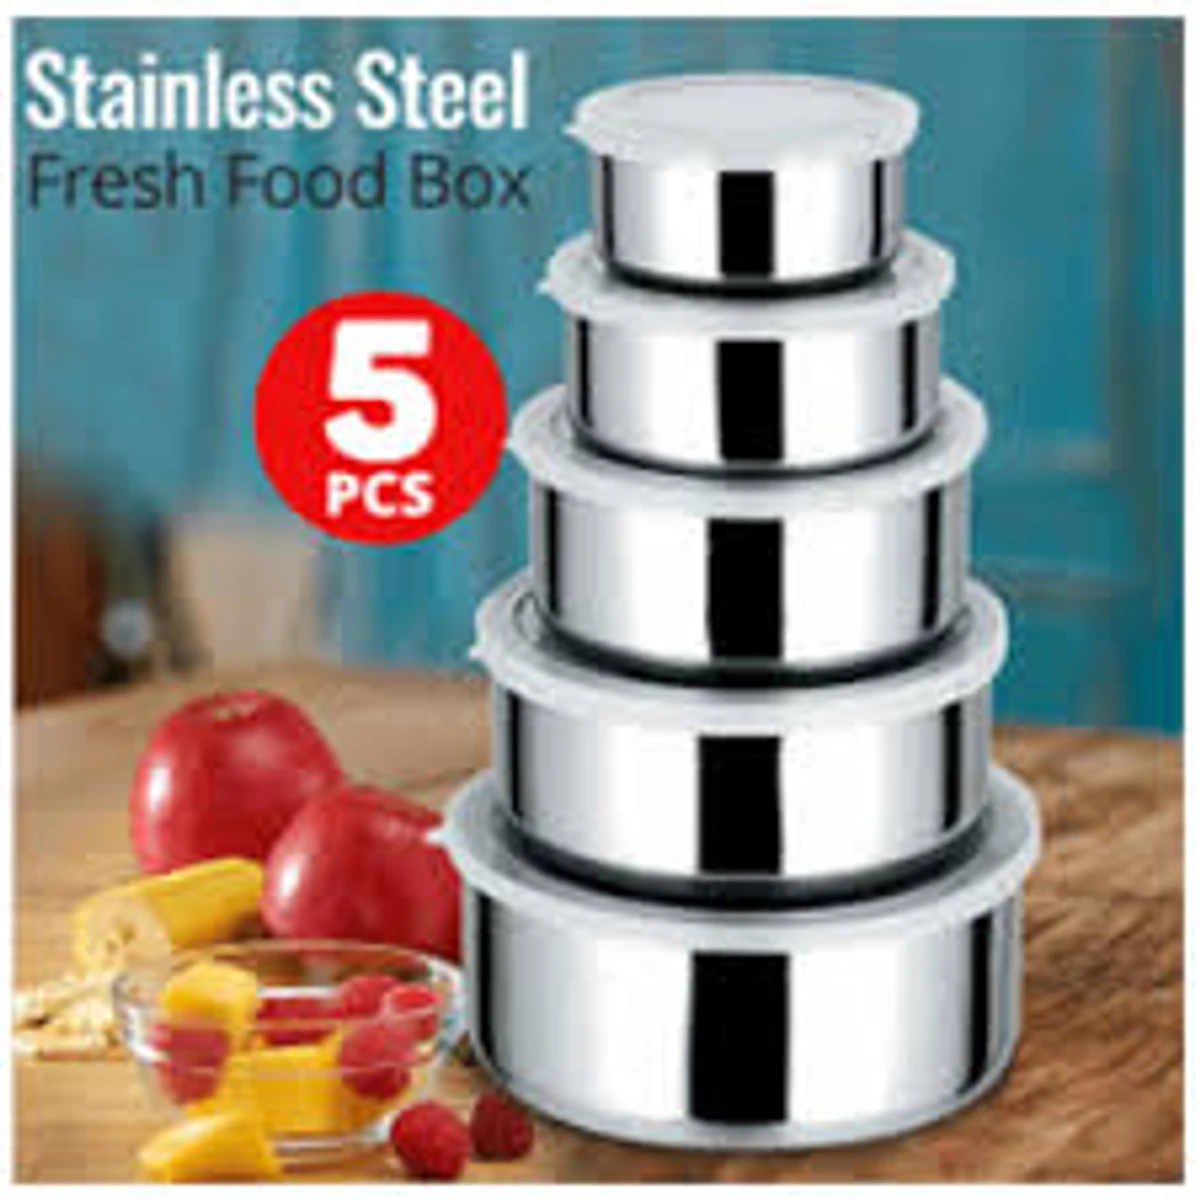 Stainless Steel Food box